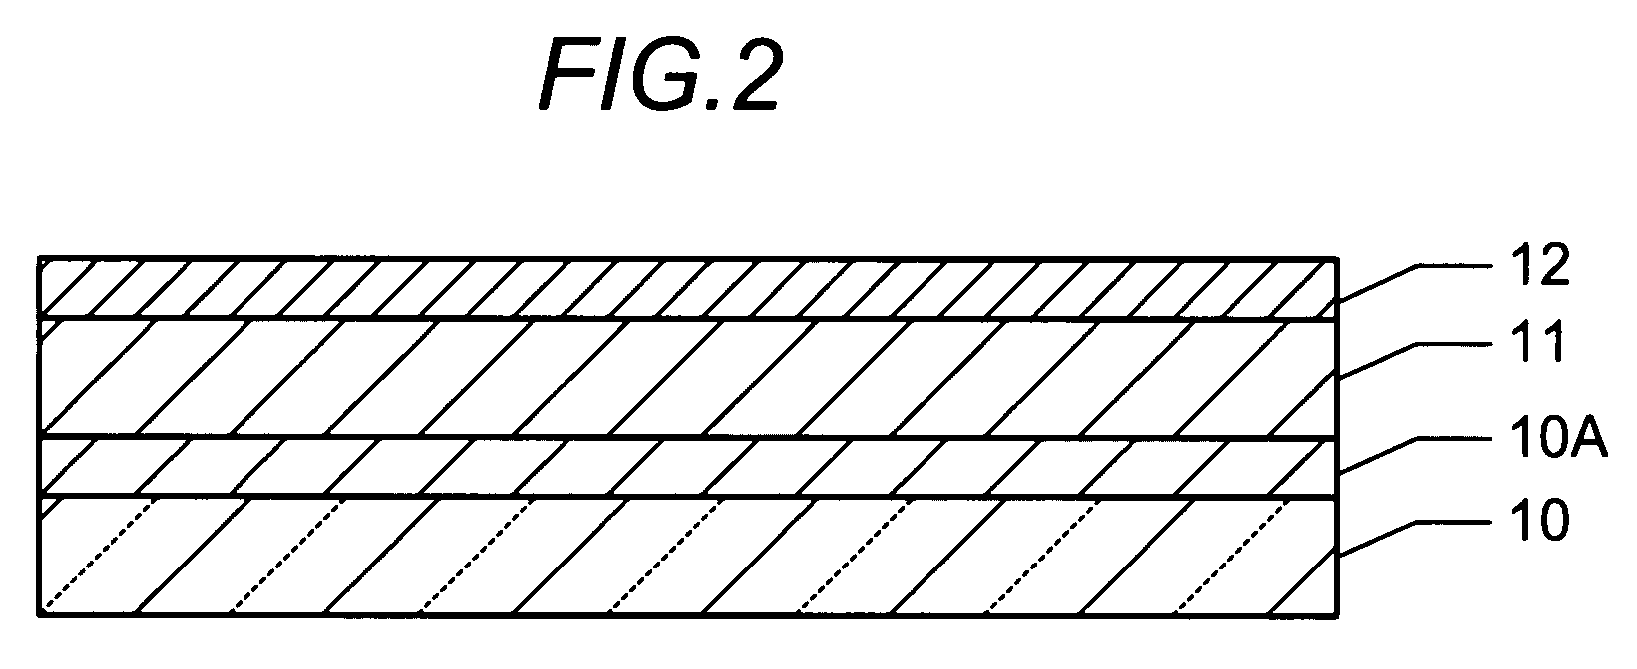 Semiconductor device having MIS structure and its manufacture method